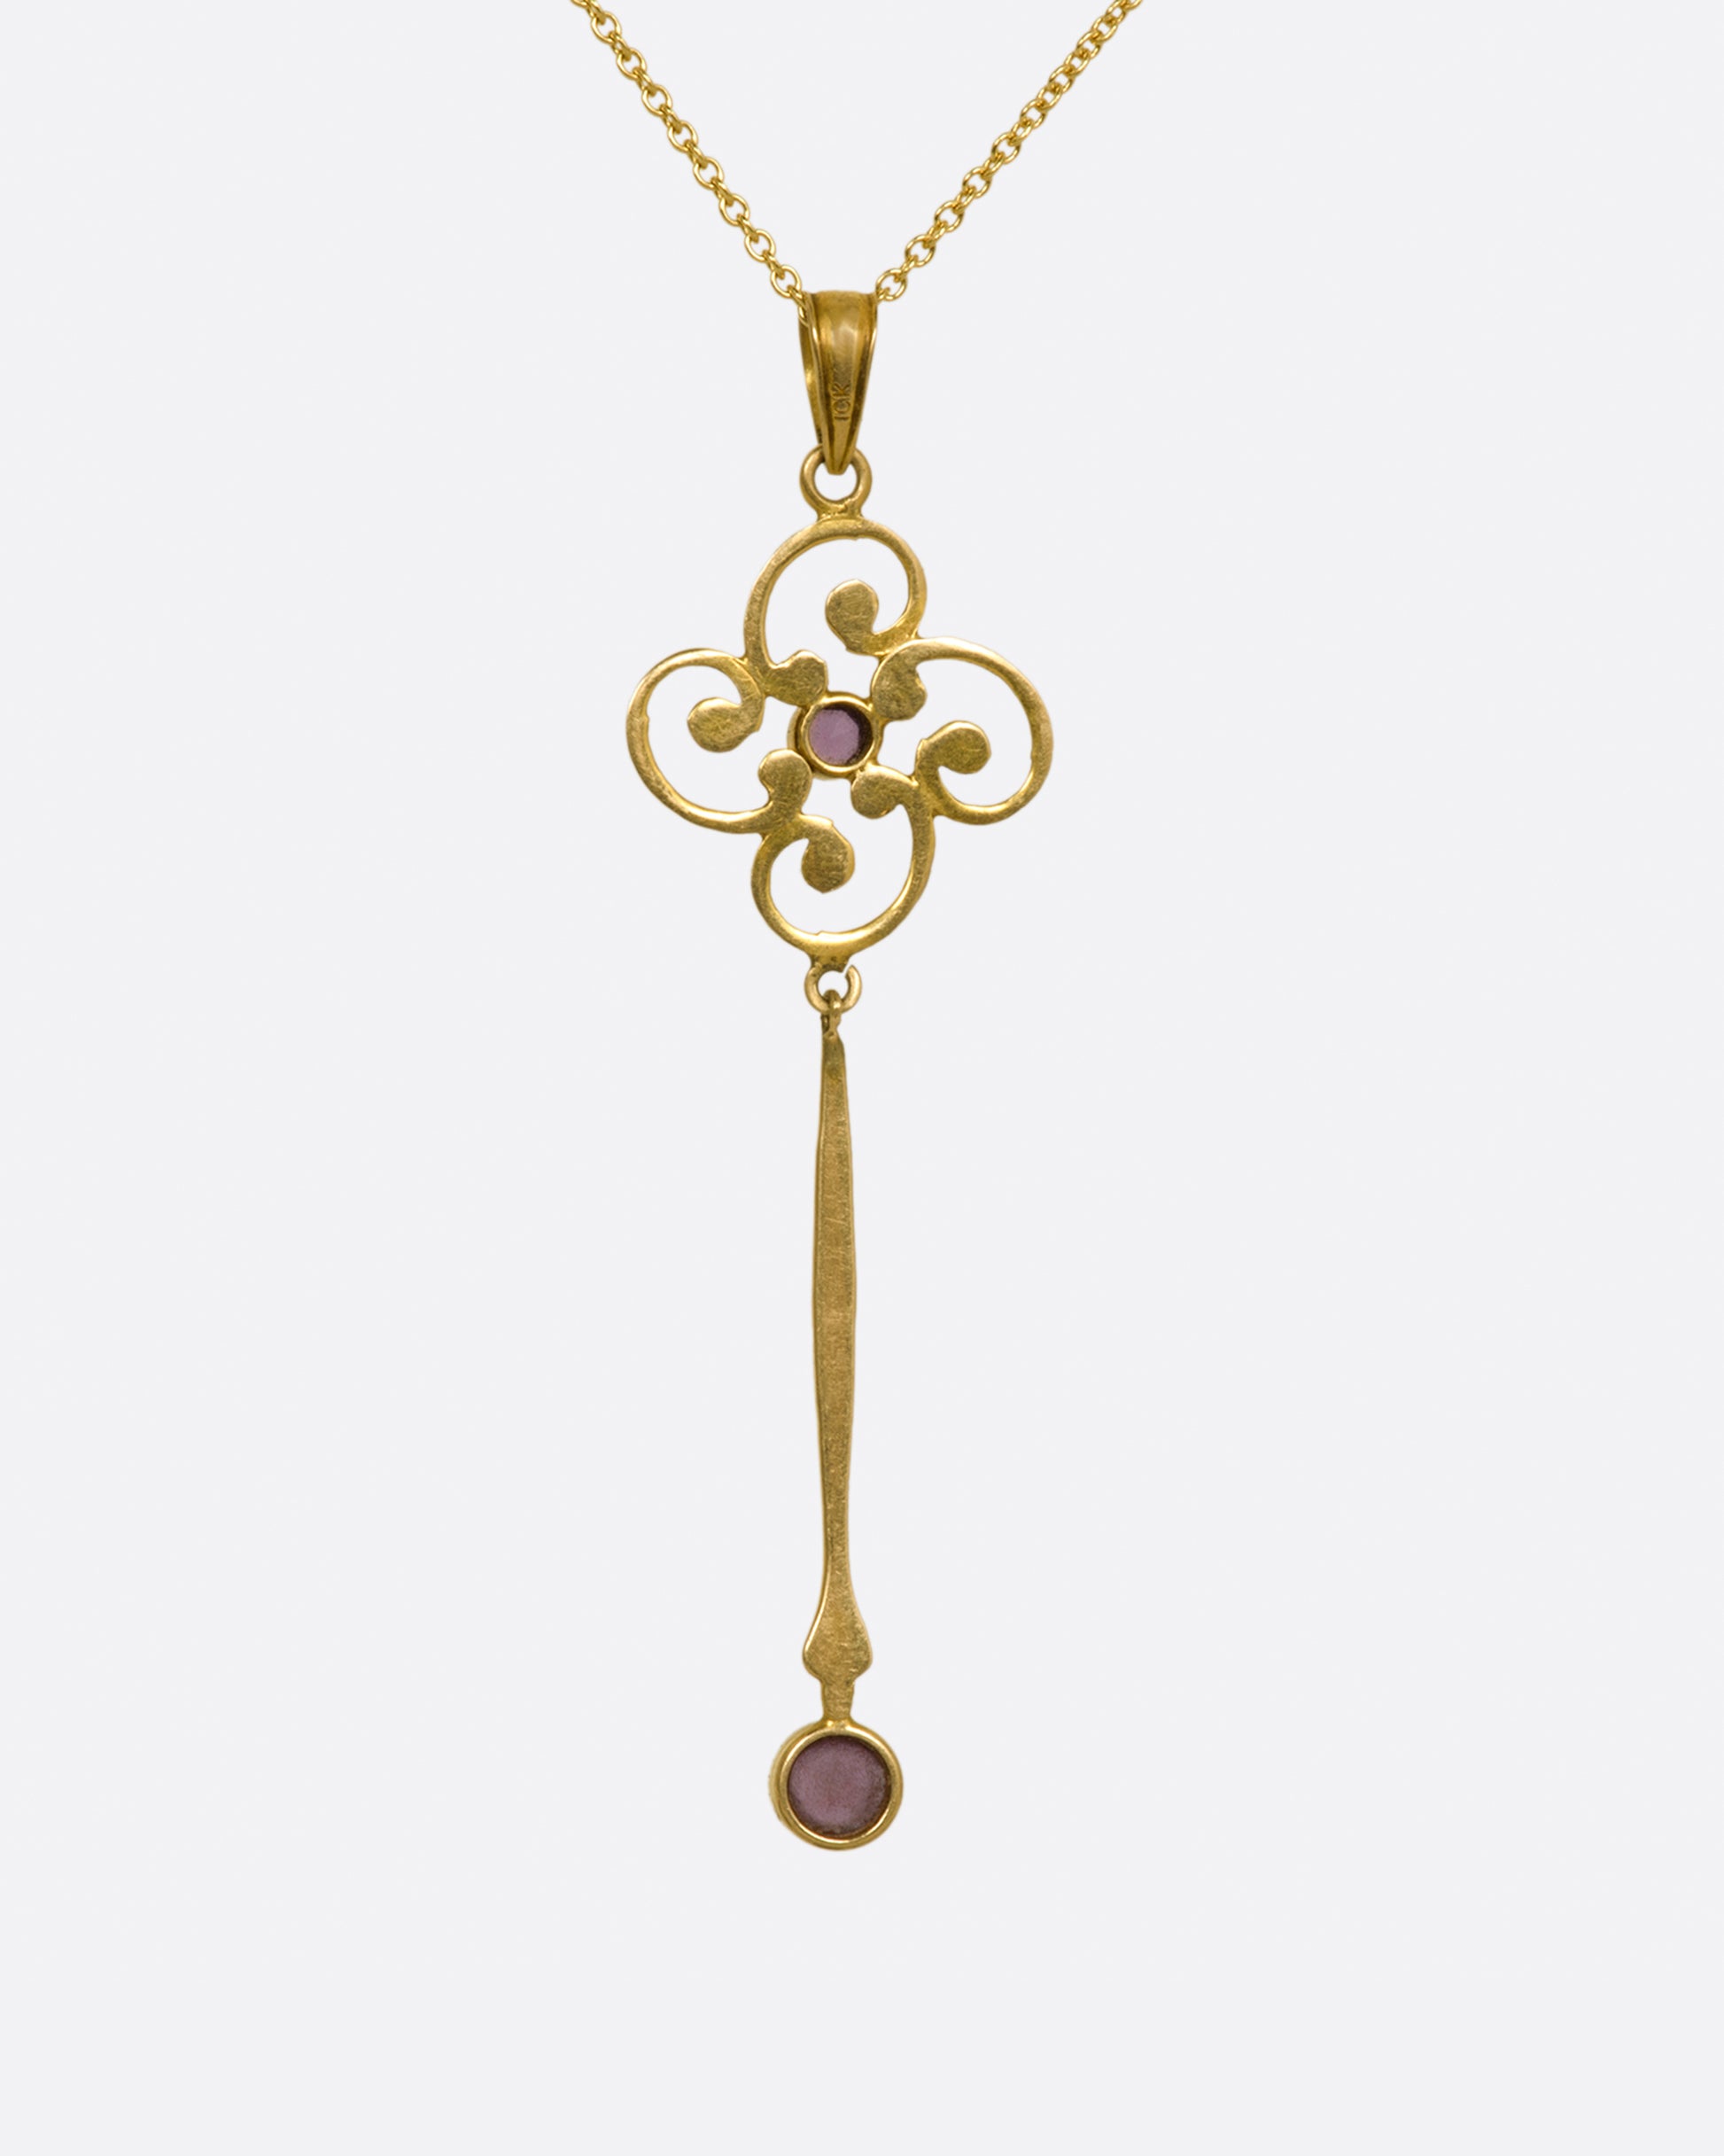 A contemporary yellow gold chain necklace with a vintage yellow gold pendant. The pendant has a flower-like design at the top with with a long bar hanging from it, and a round amethyst at the bottom.